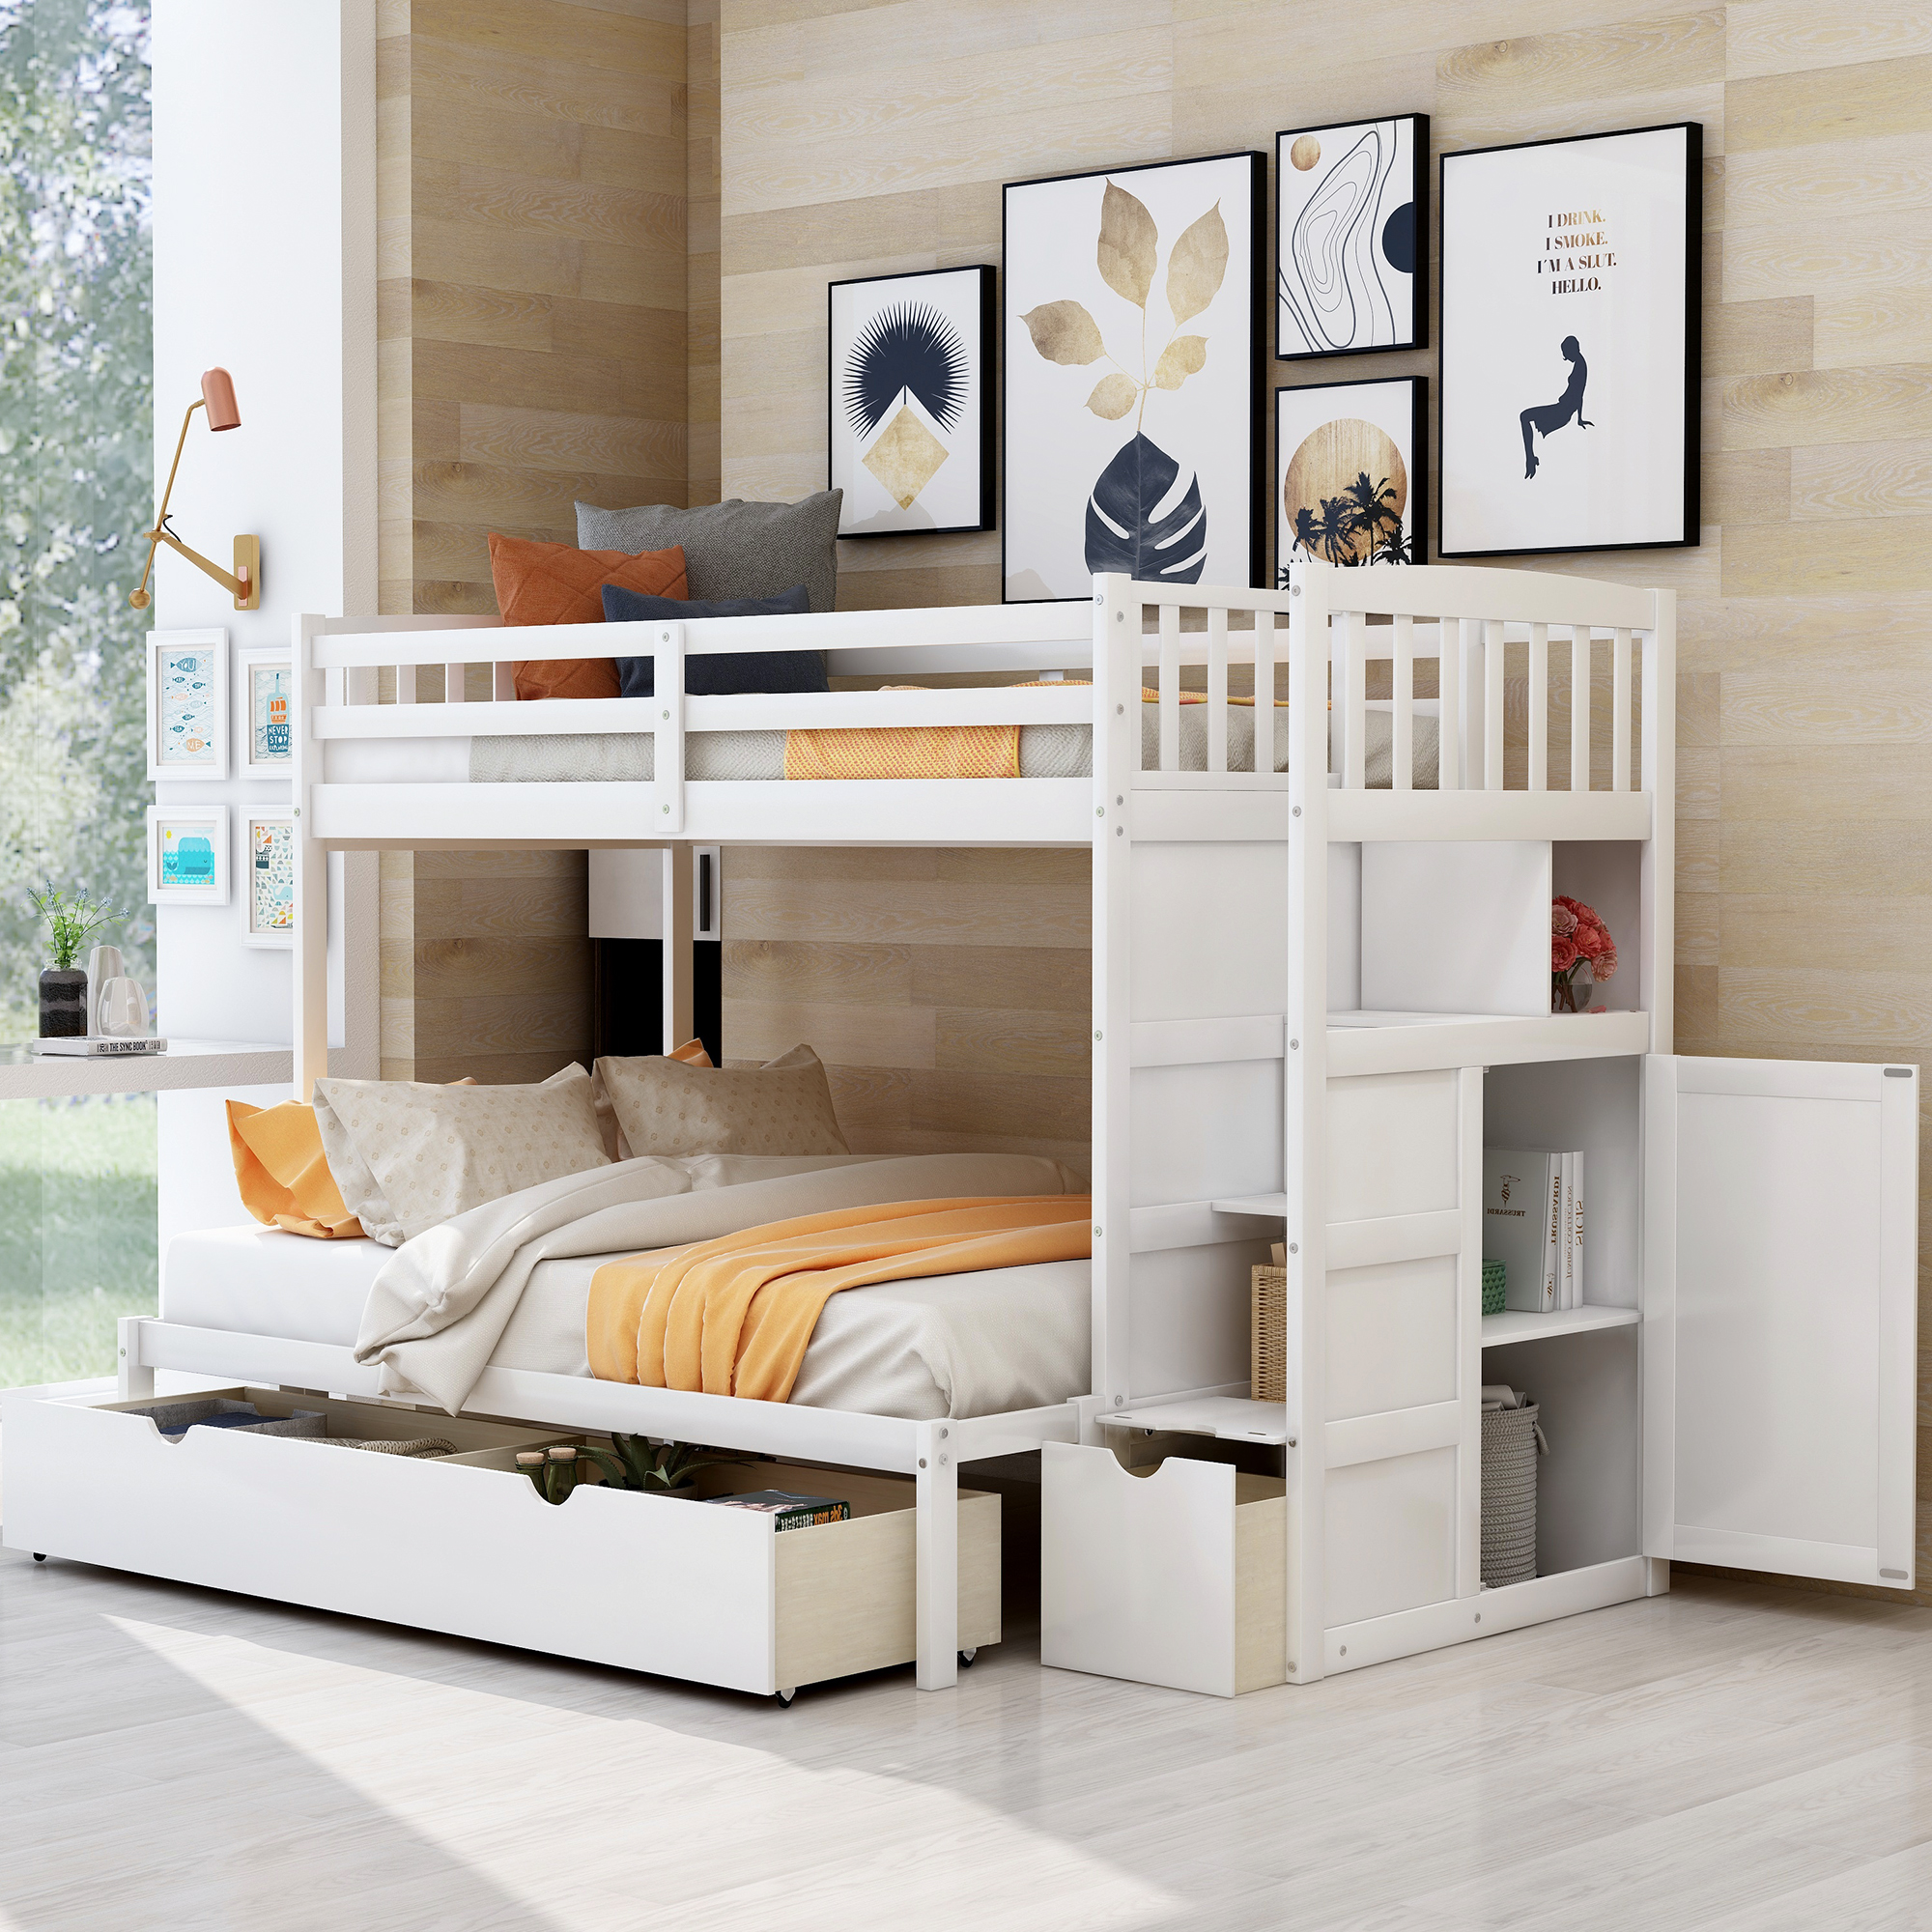 Twin over Full/Twin Bunk Bed, Convertible Bottom Bed, Storage Shelves and Drawers, White-CASAINC